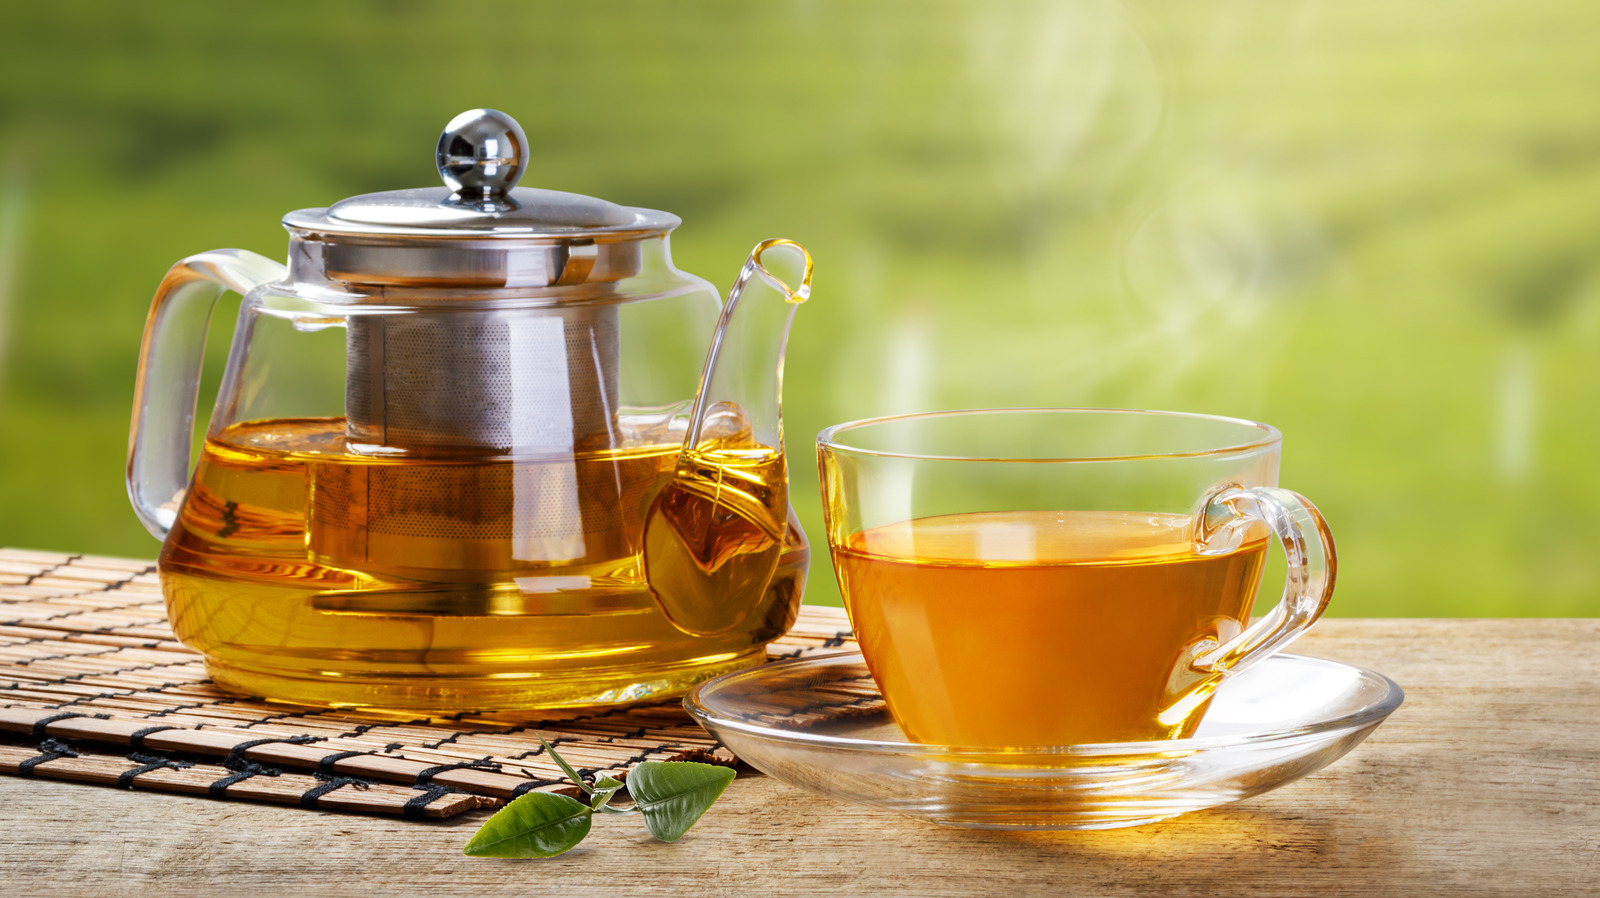 20 Tea Brands, Ranked From Worst To Best